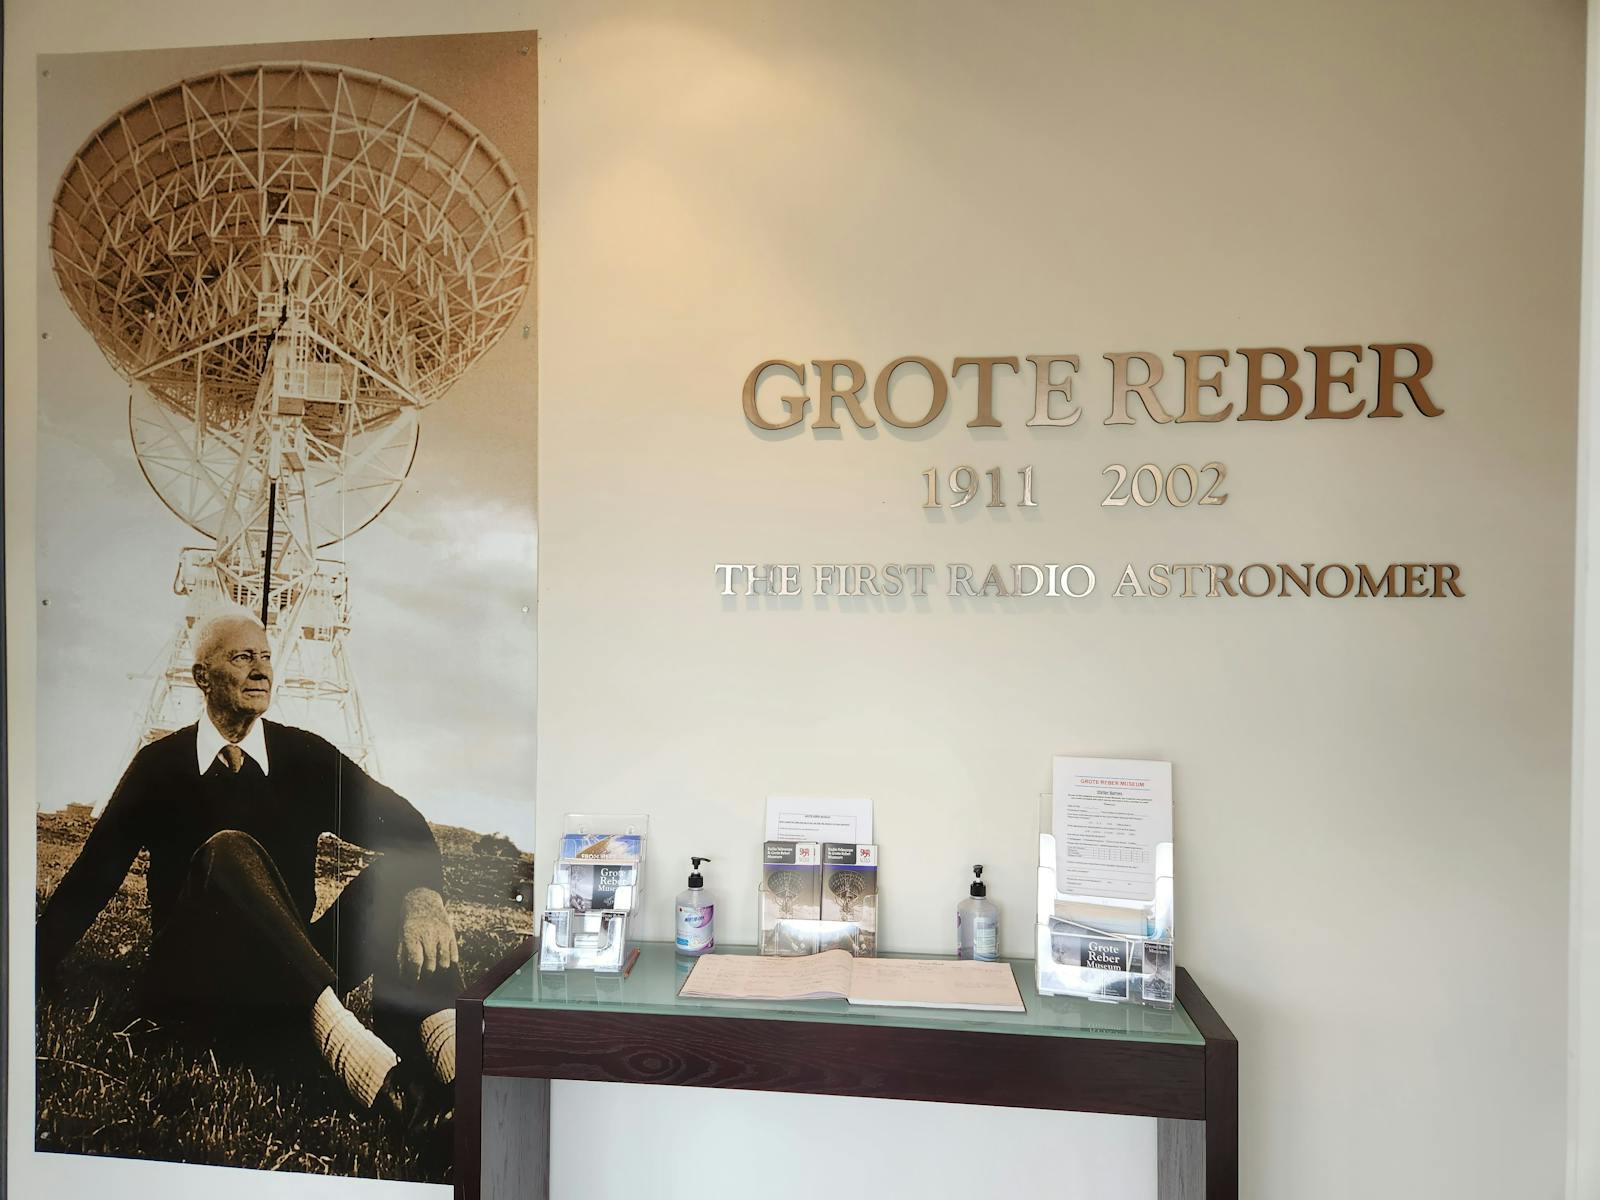 Museum entrance: Grote Reber (1911-2002) and a picture of him sitting near to the radio telescope.